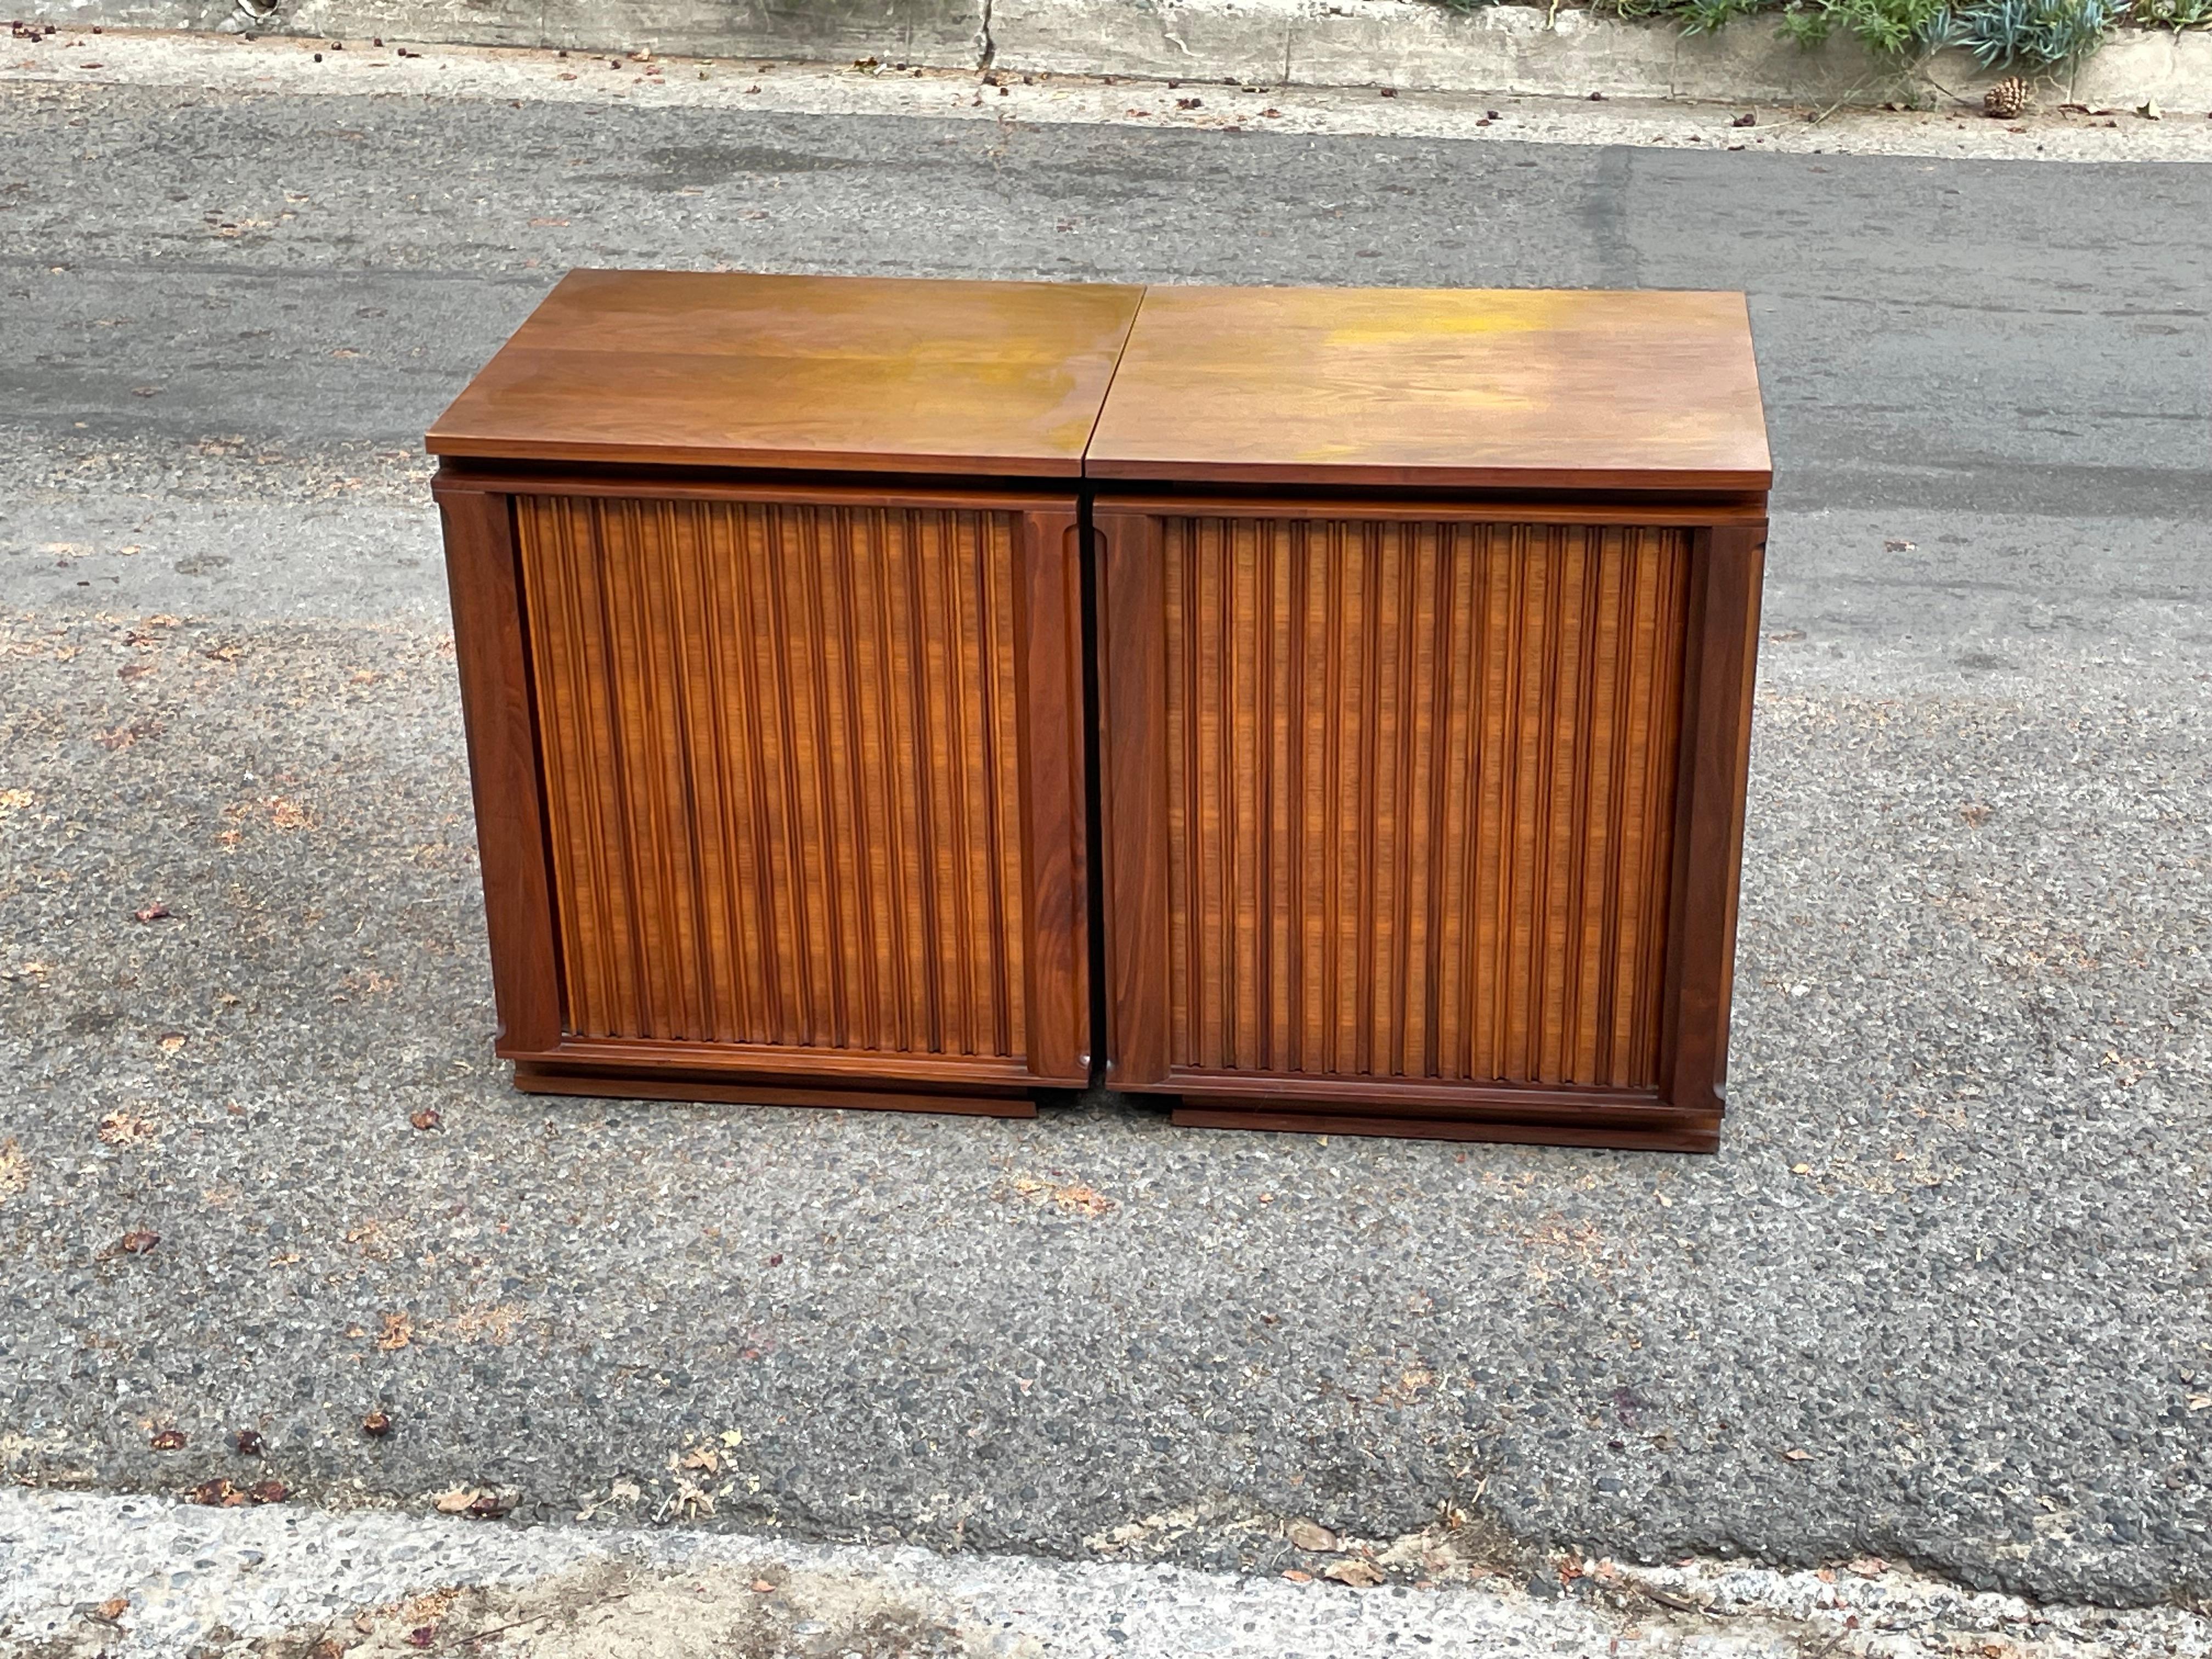 Gorgeous Mid-Century Modern Tambour Door Credenza Cabinet by Barzilay. Can also be used separately as end tables, circa 1960s

It was originally two speaker cabinets. Inside is totally open so it's perfect for storage.

Rare piece. The two